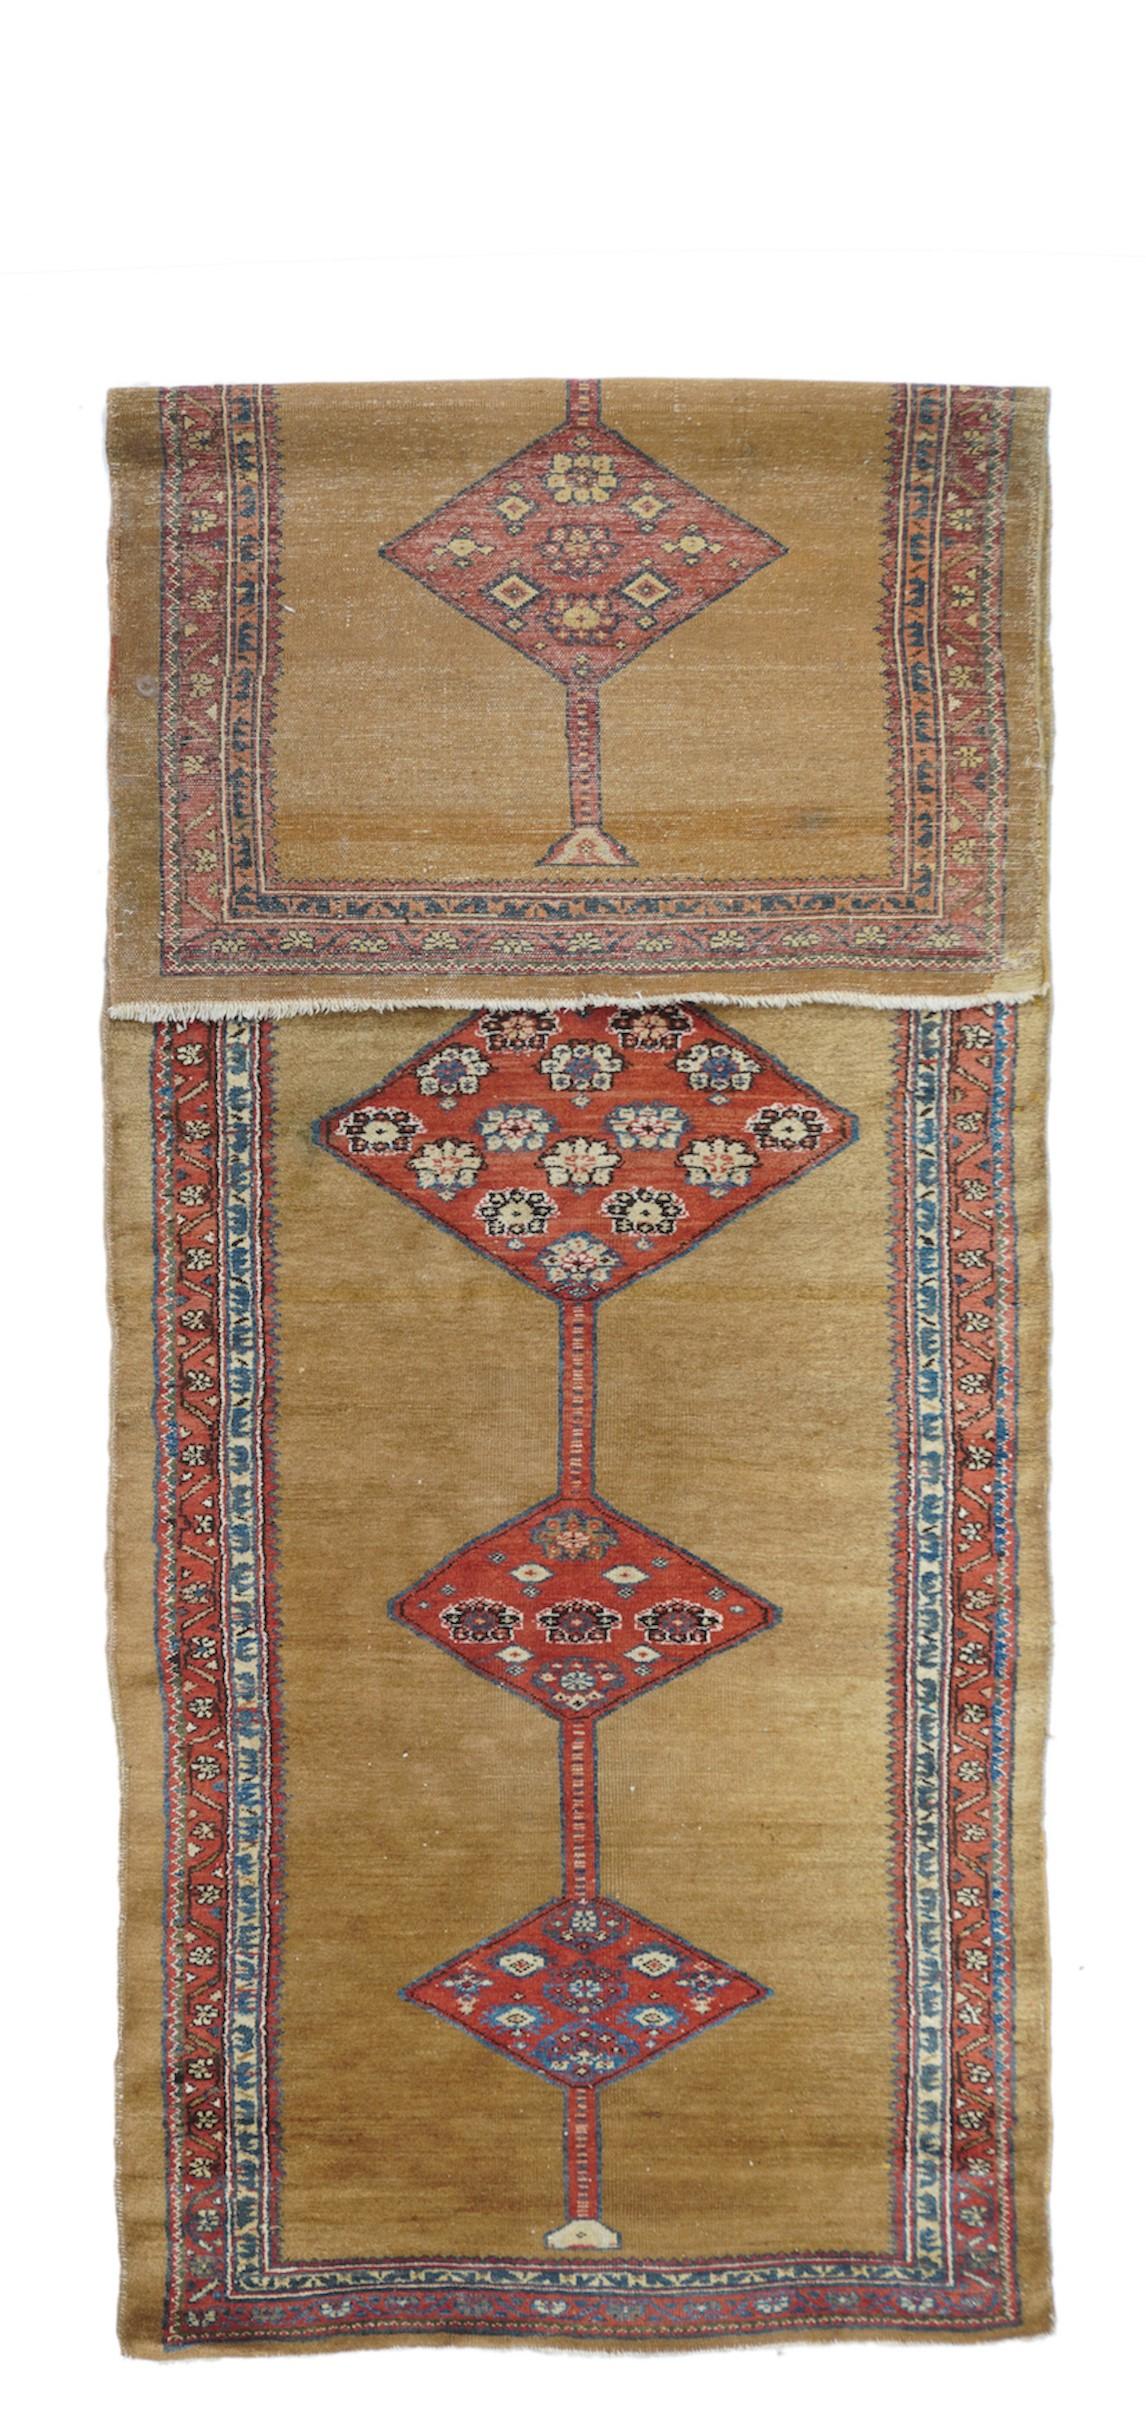 Antique North West runner 3'4'' x 10'1''. If it is camel-toned, it must be NW Persian! The mid-camel open field shows a pole medallion of five red lozenges enclosing various rosettes. Narrow red border with reversing fan palmettes. Medium rustic